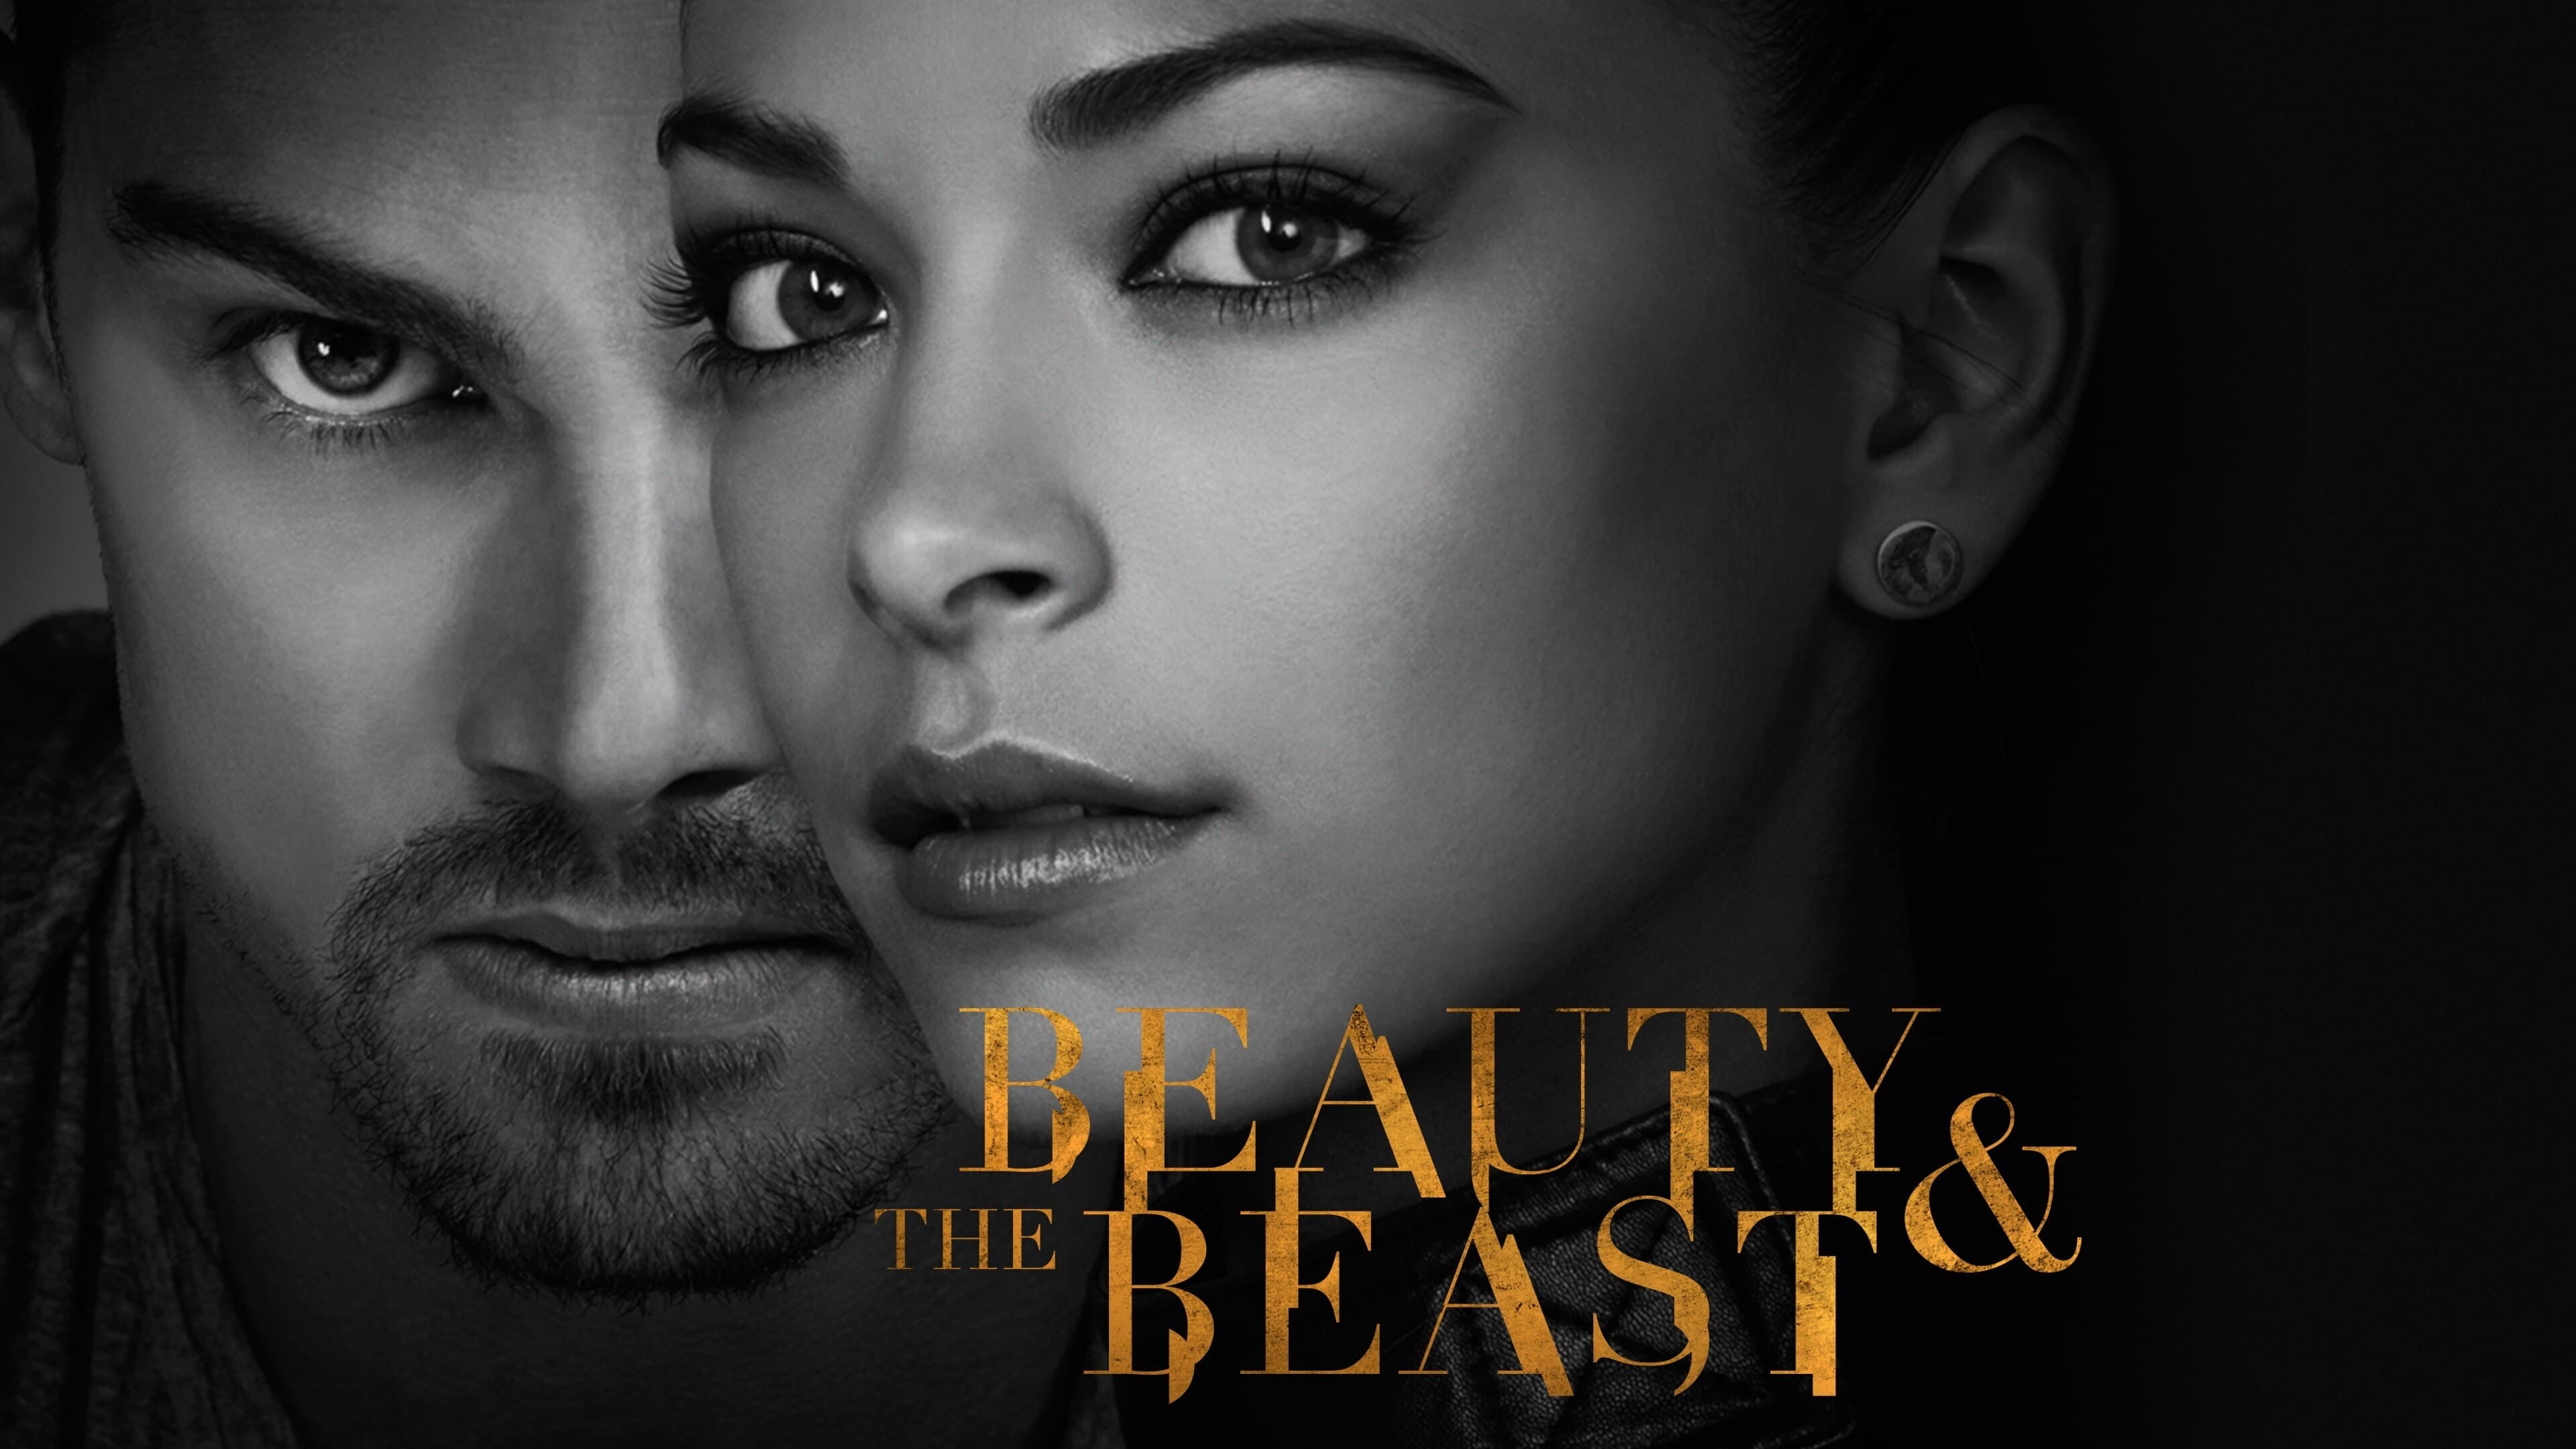 TV Show Beauty and the Beast (2012) HD Wallpaper | Background Image